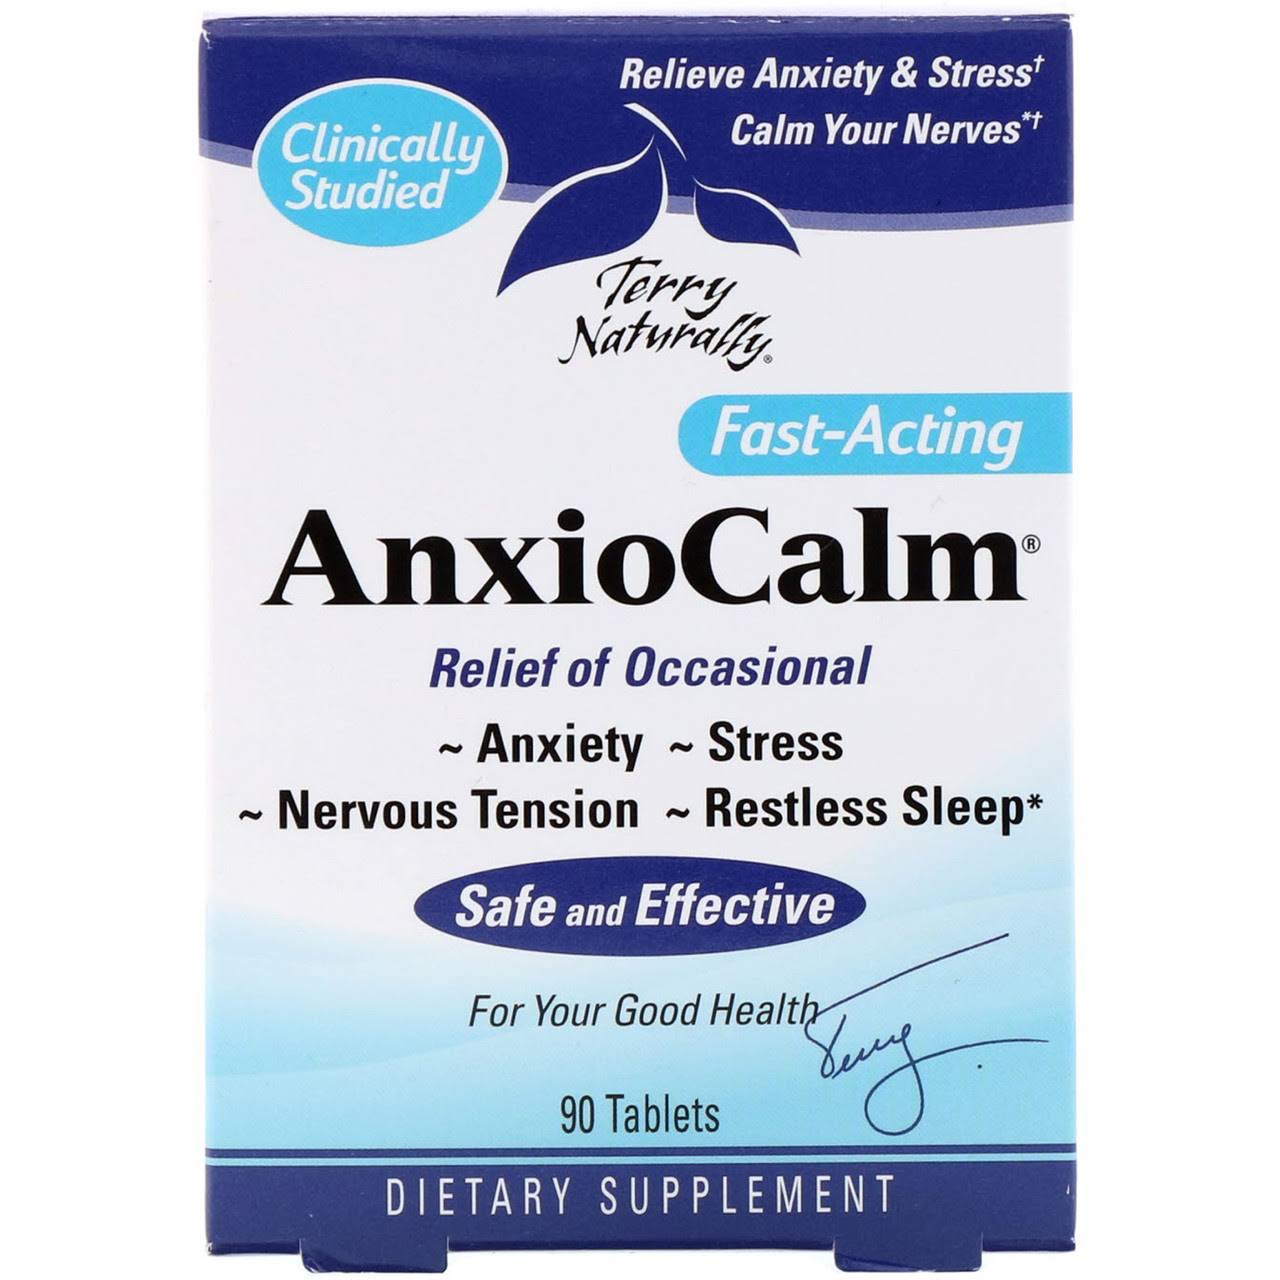 Terry Naturally AnxioCalm - 90 Tablets